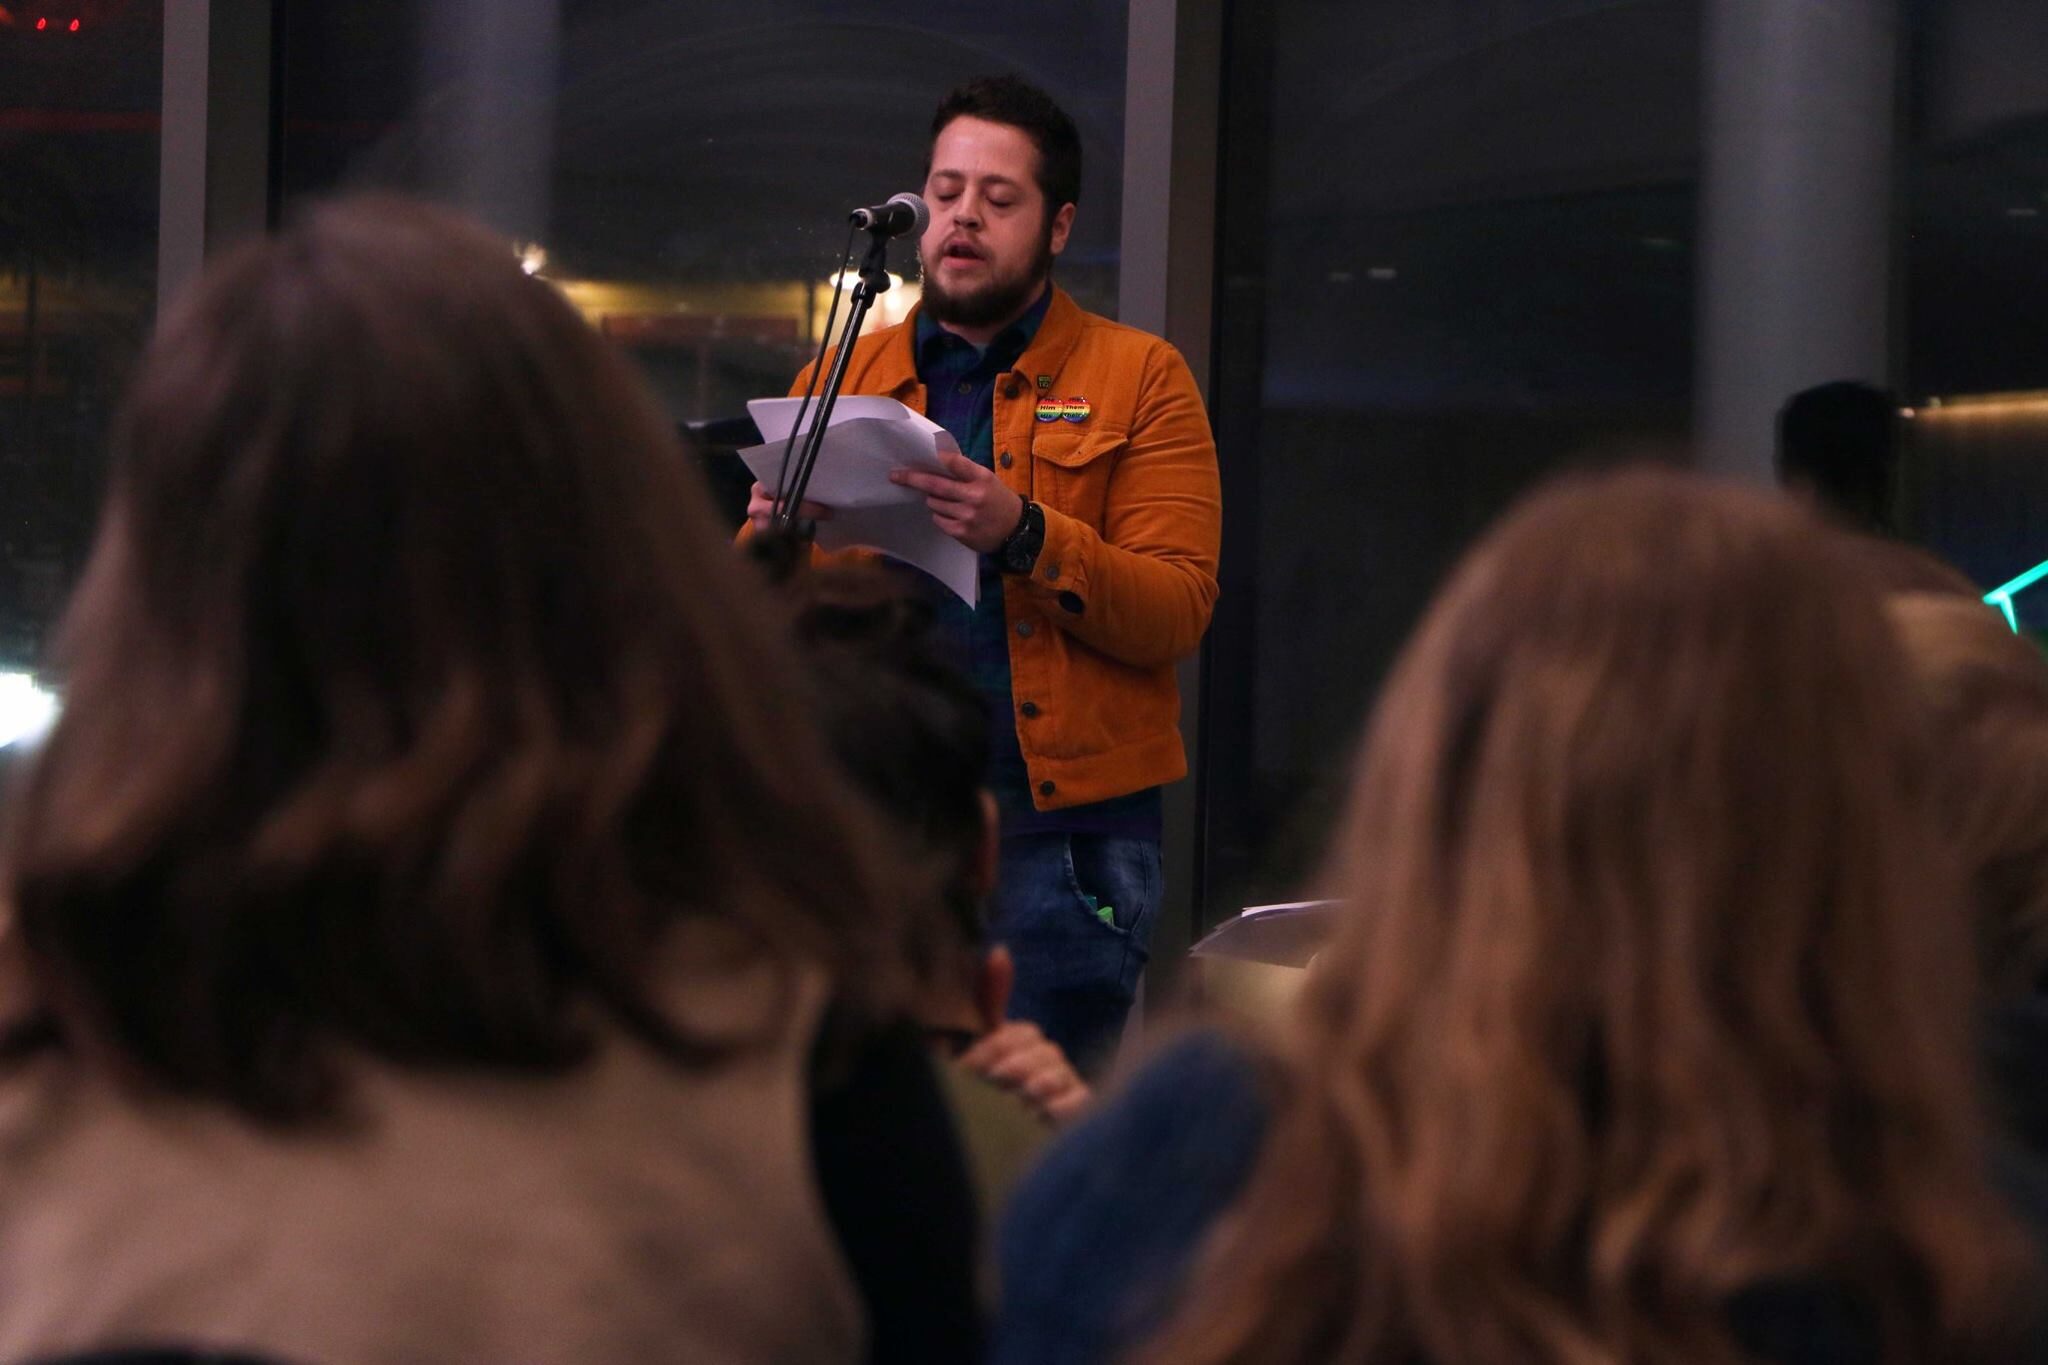 The poet Brody Parrish Craig performs at an in-person event. They are on a stage with a microphone, and they hold pieces of paper in their hands. They have short brown hair and are wearing an orange jacket.